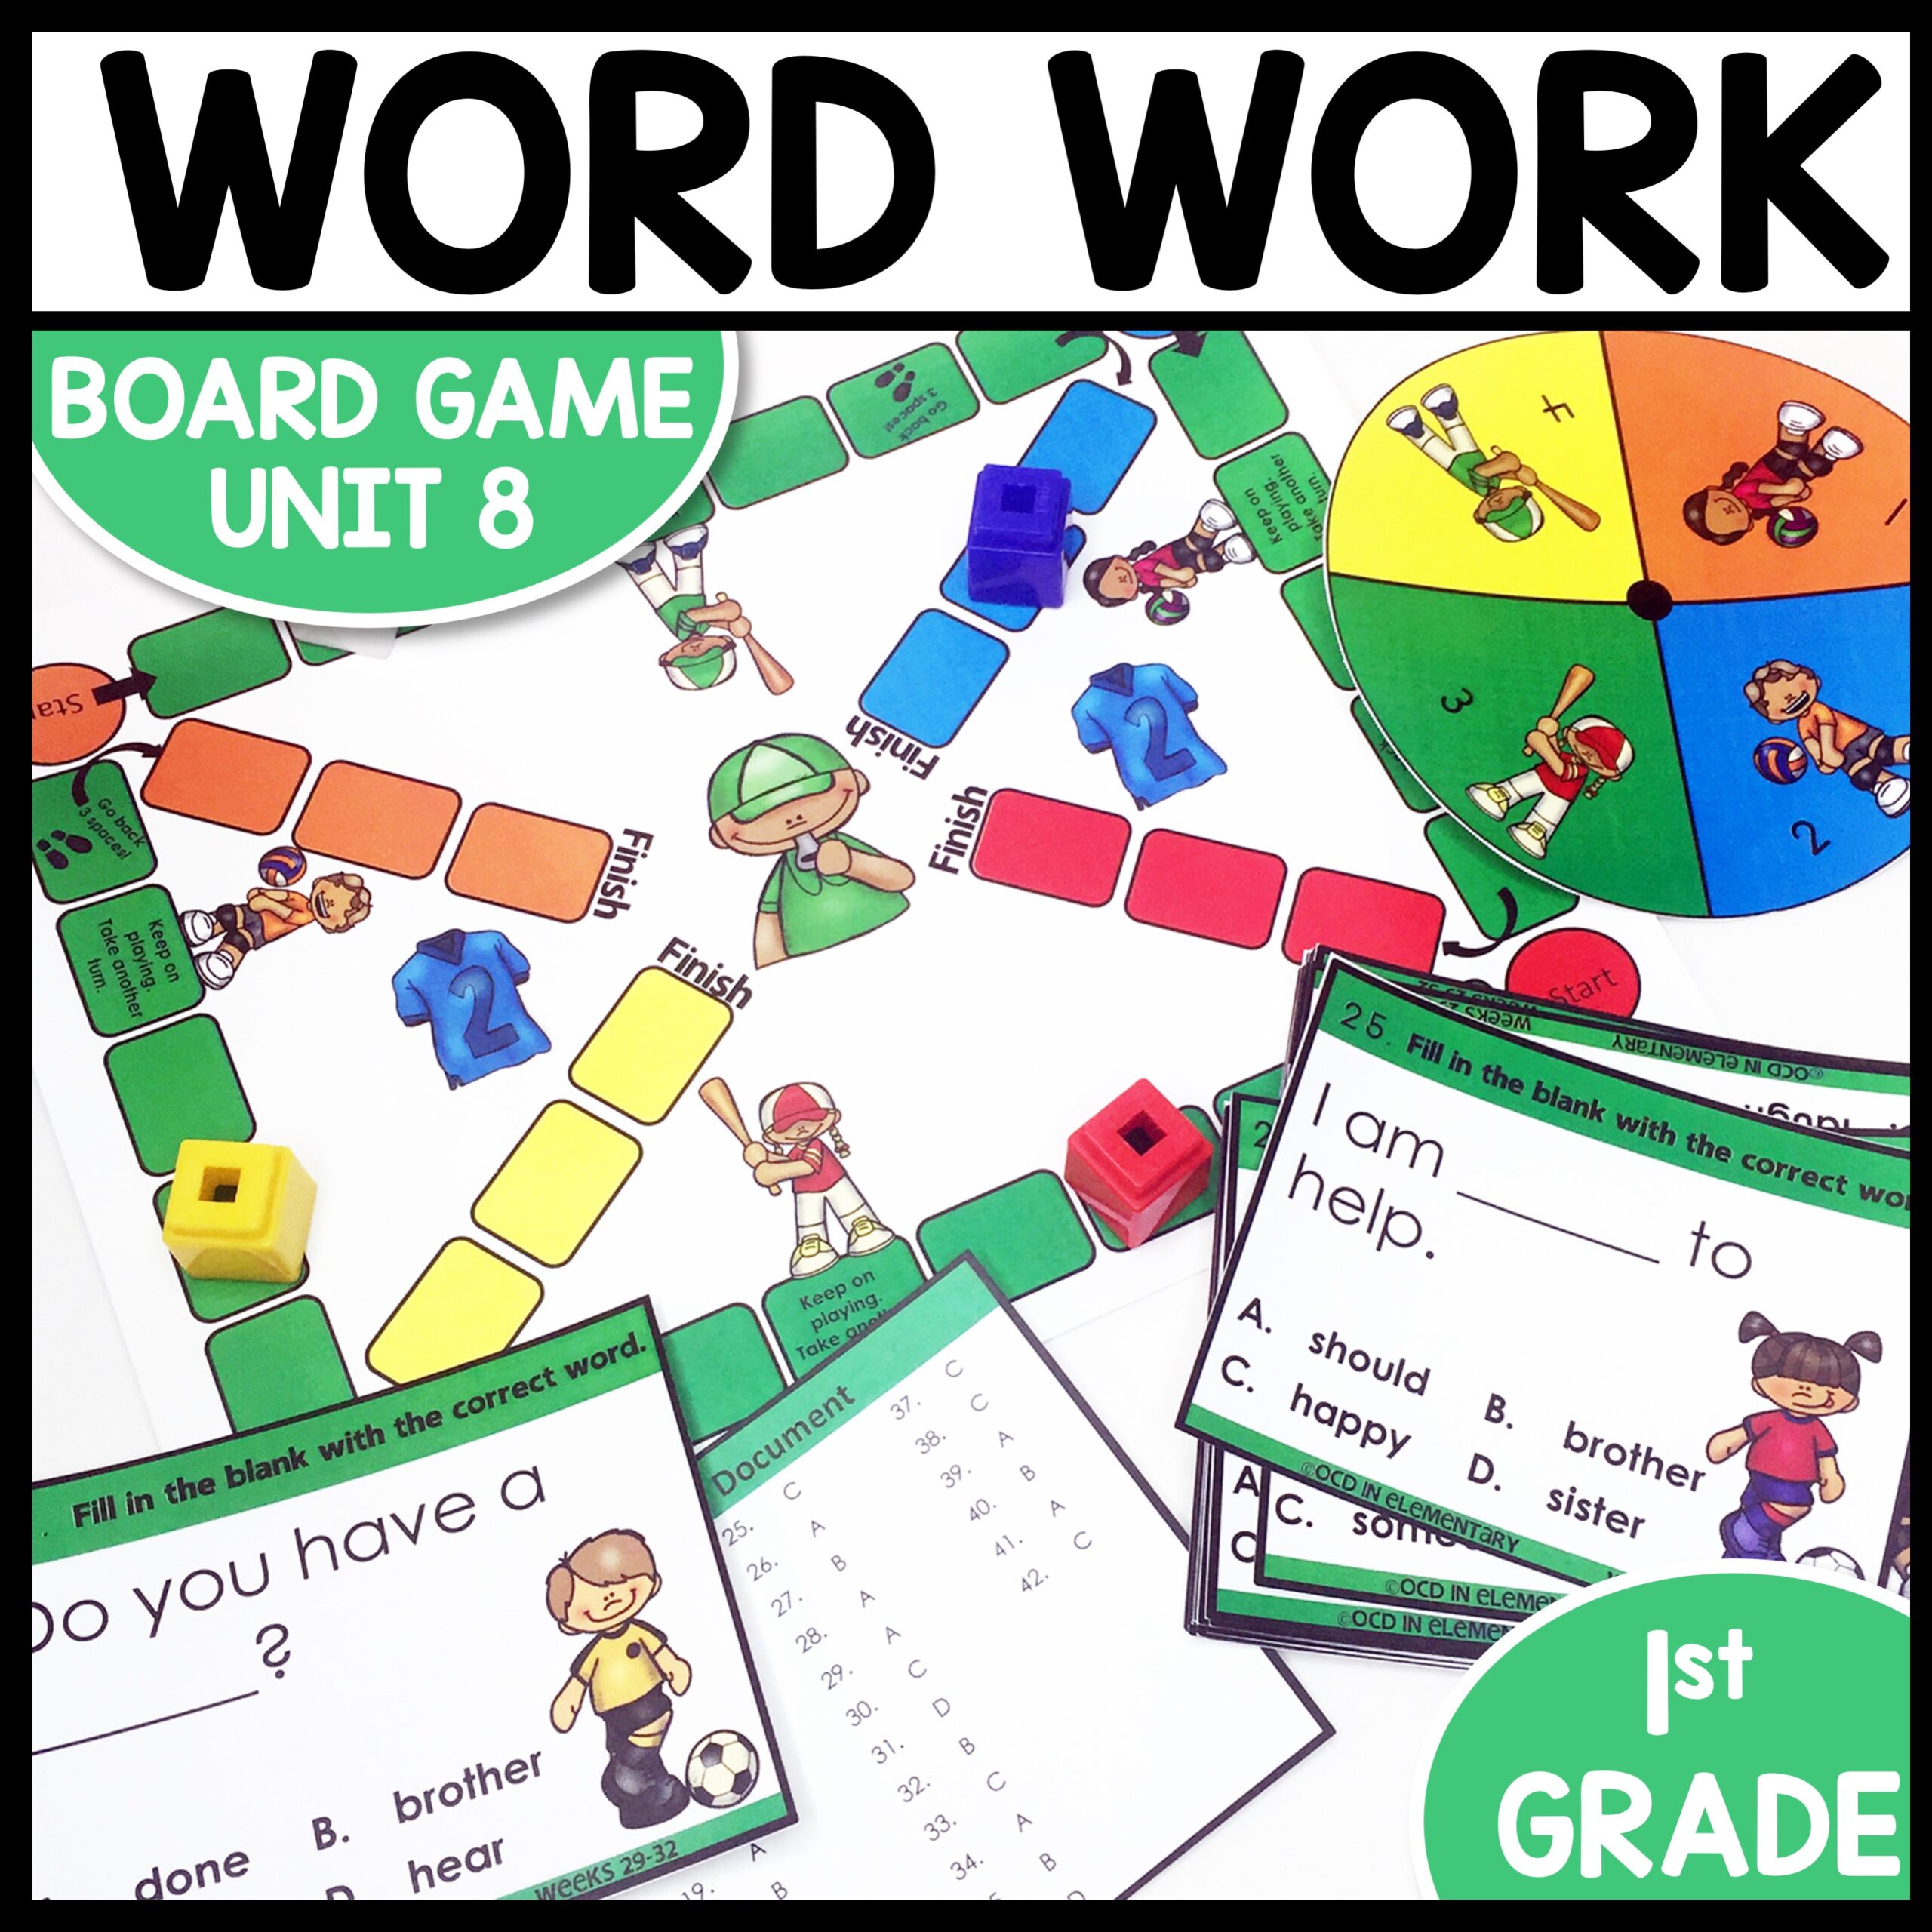 Word Work Task Cards Game Unit 8